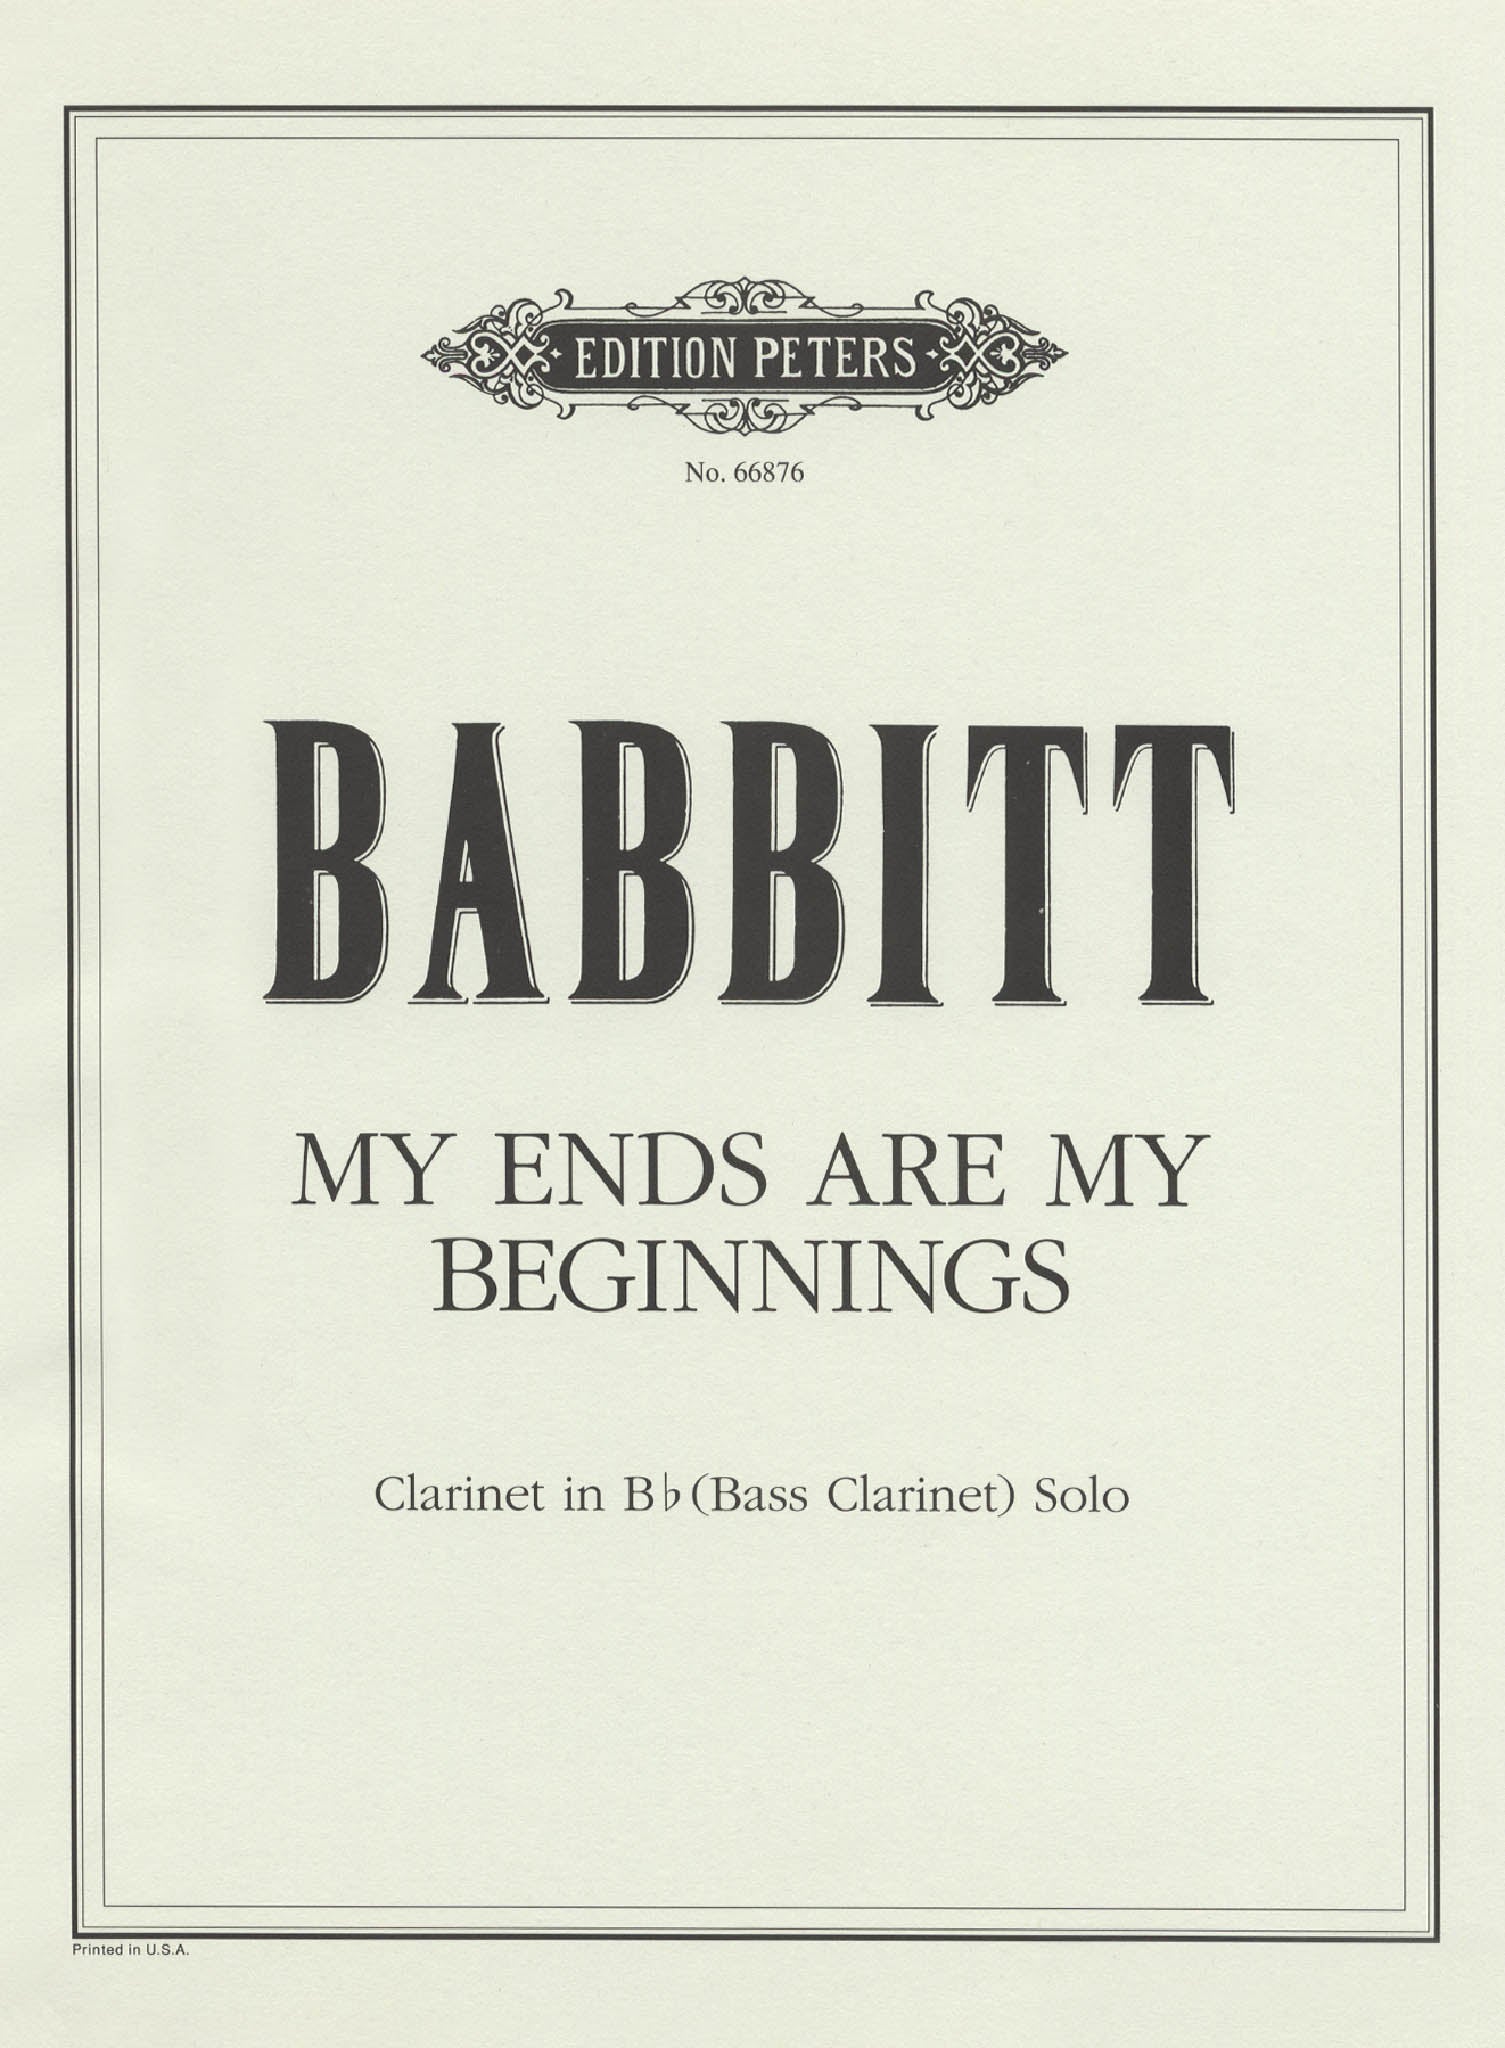 Babbitt My Ends Are My Beginnings Cover